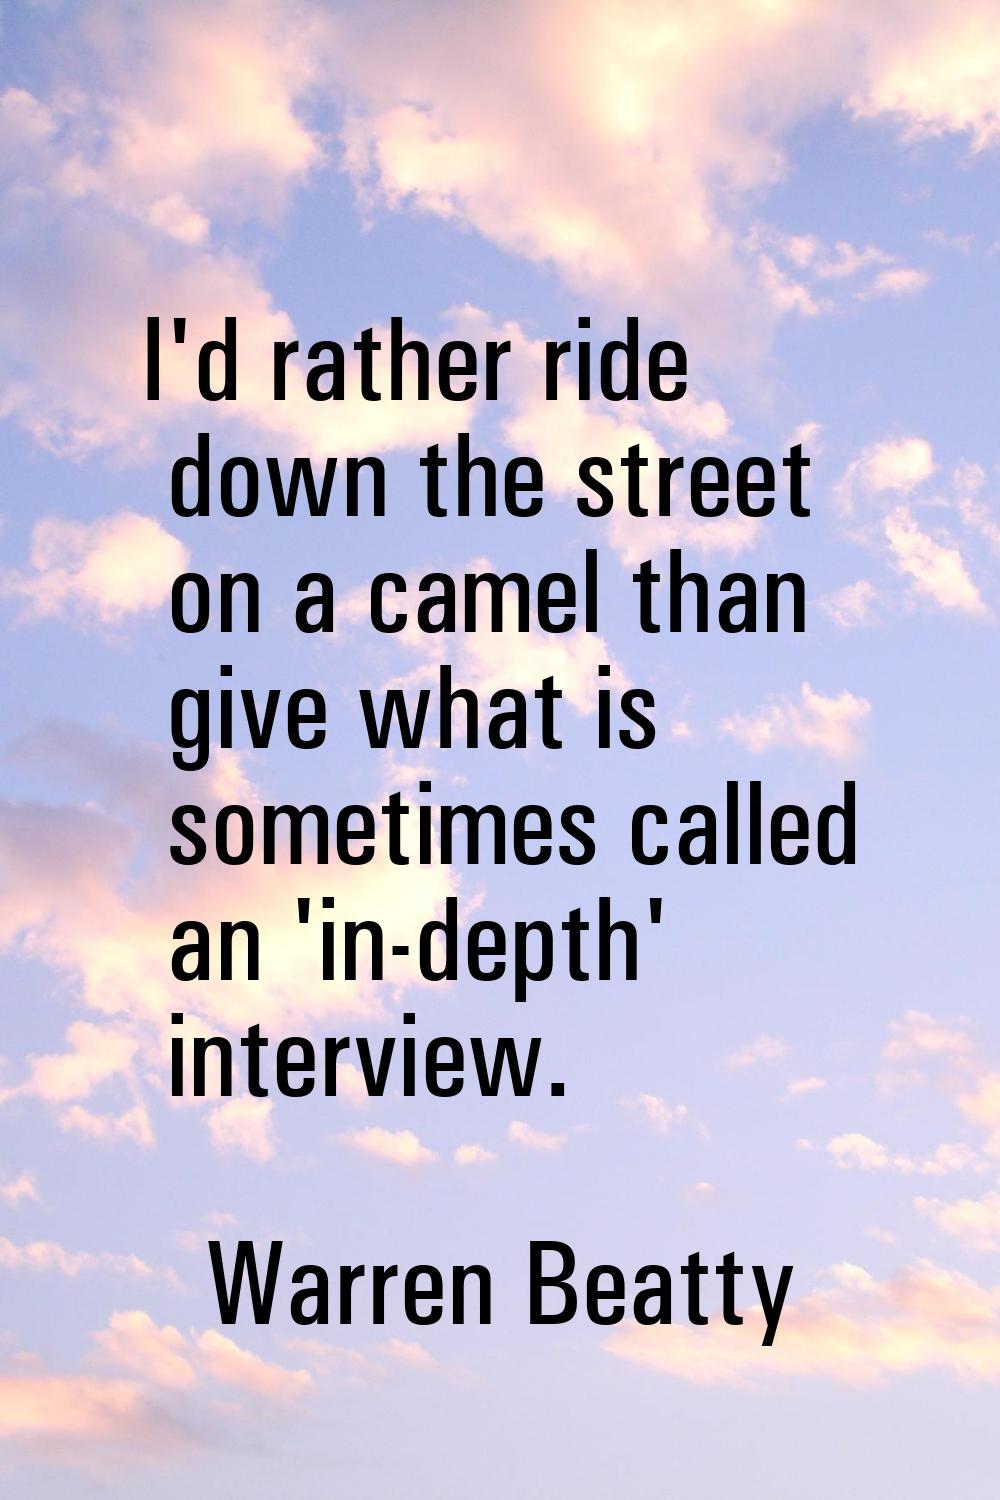 I'd rather ride down the street on a camel than give what is sometimes called an 'in-depth' intervi